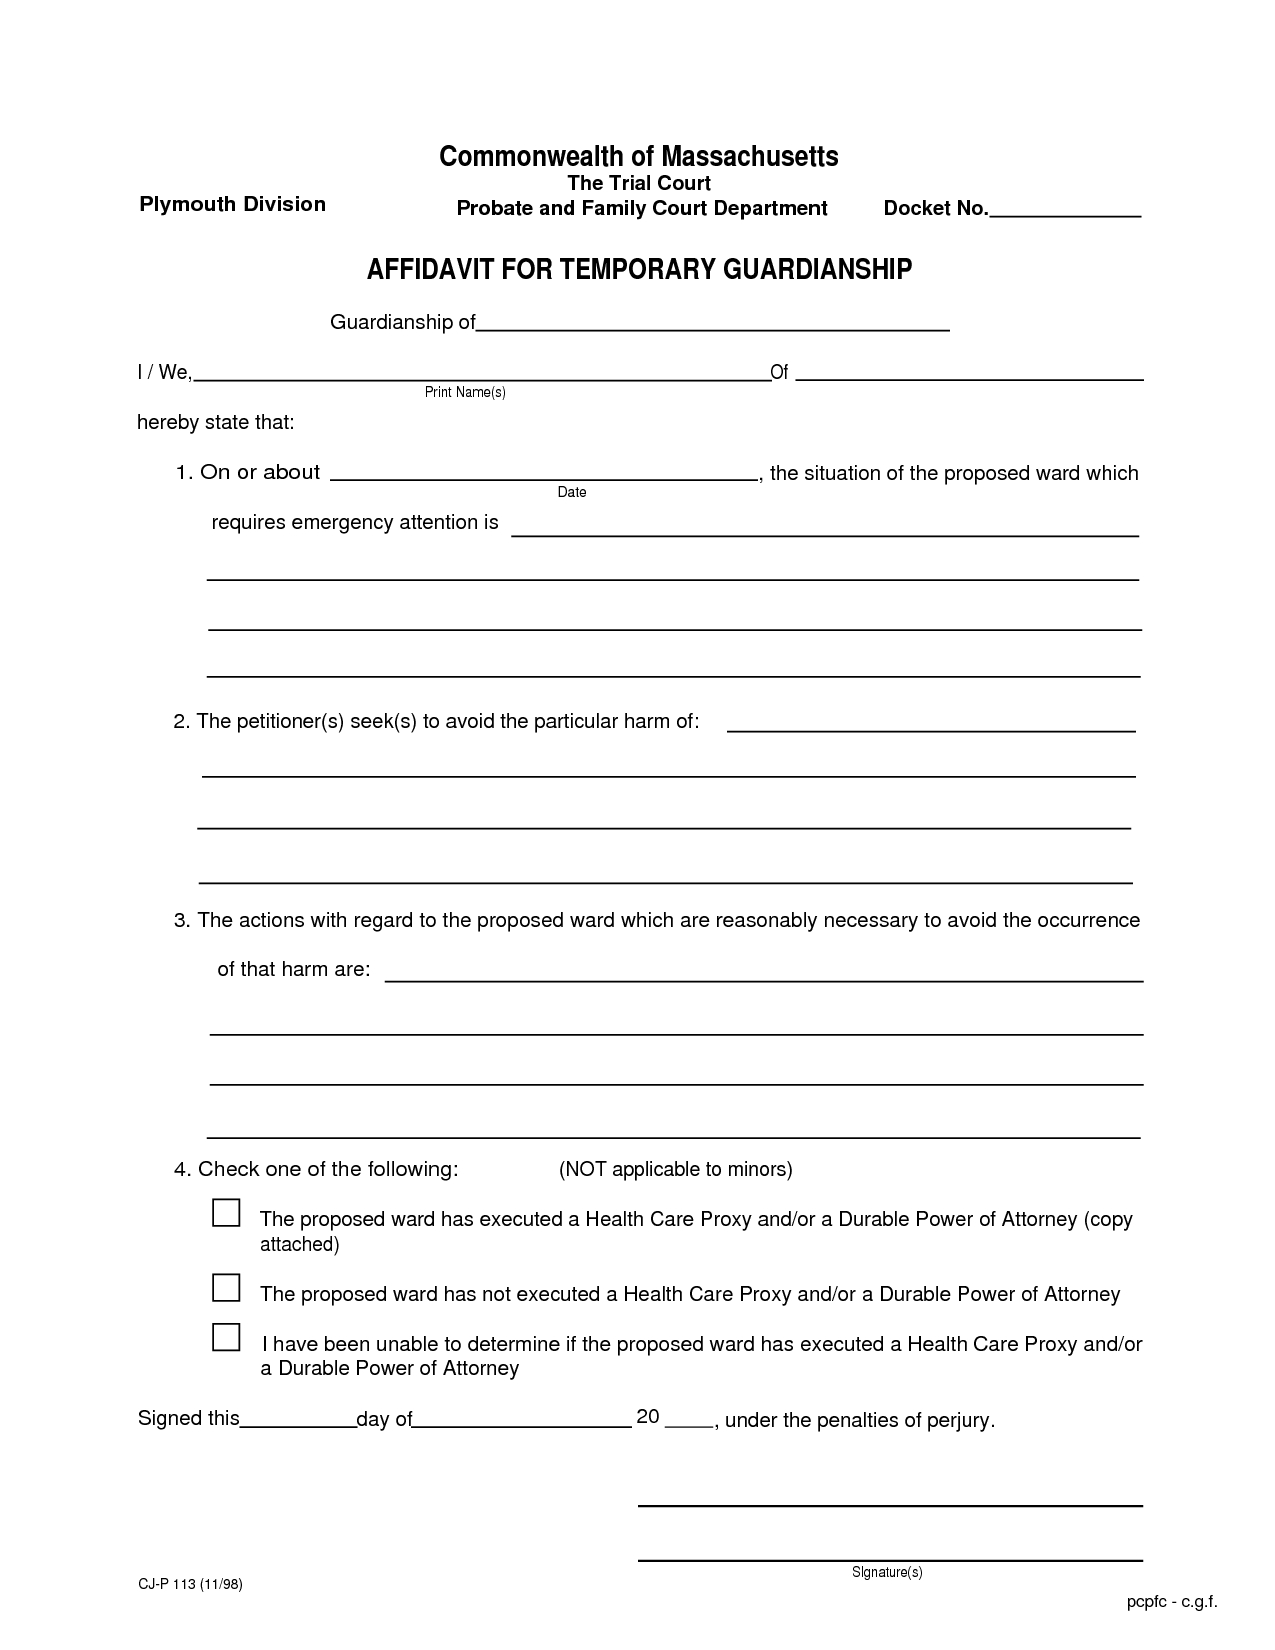 Temporary Custody Letter Template - How to Write A Letter for Guardianship Letter format formal